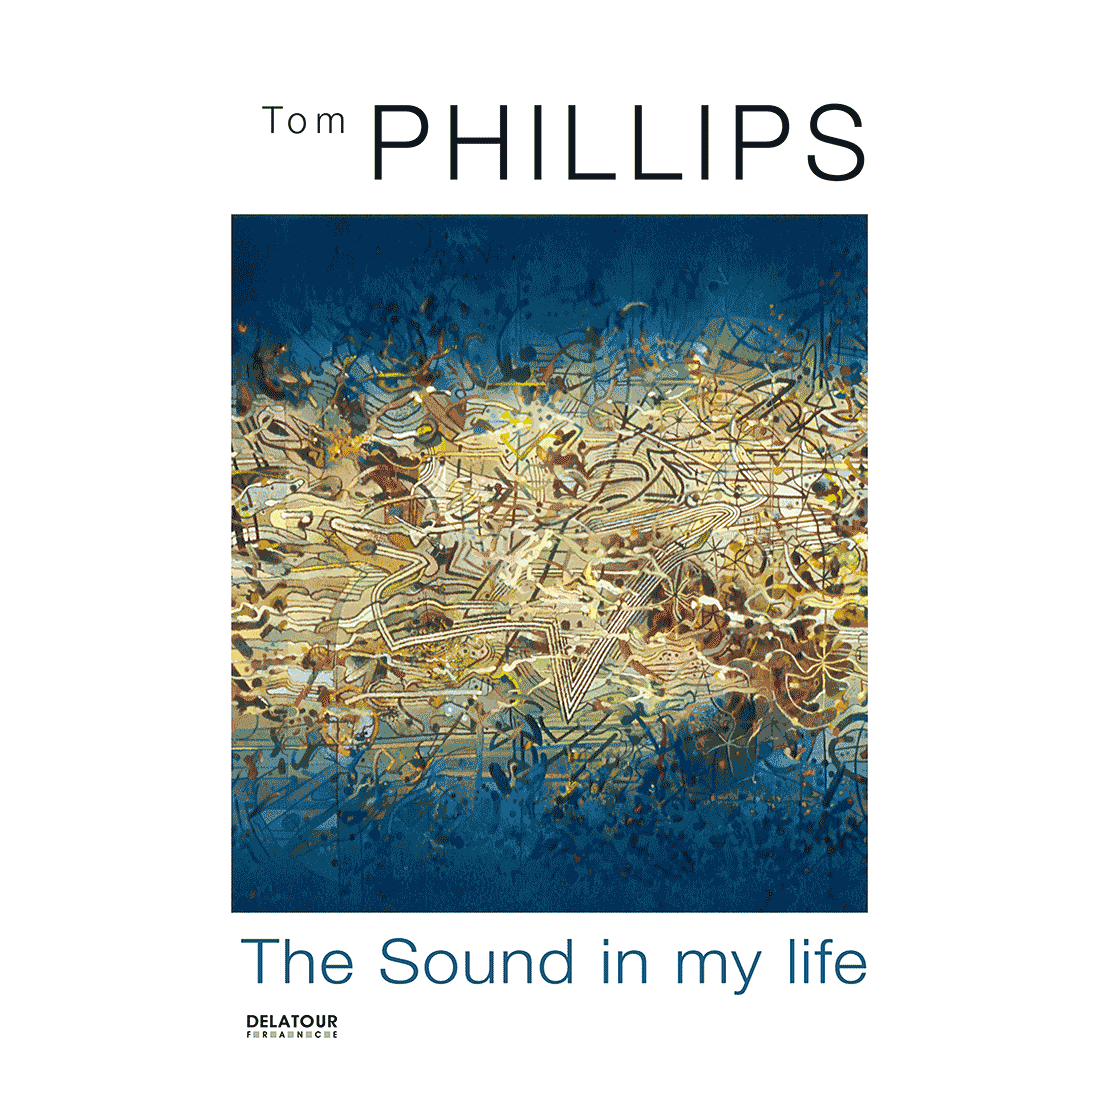 Tom Phillips – The Sound in my Life